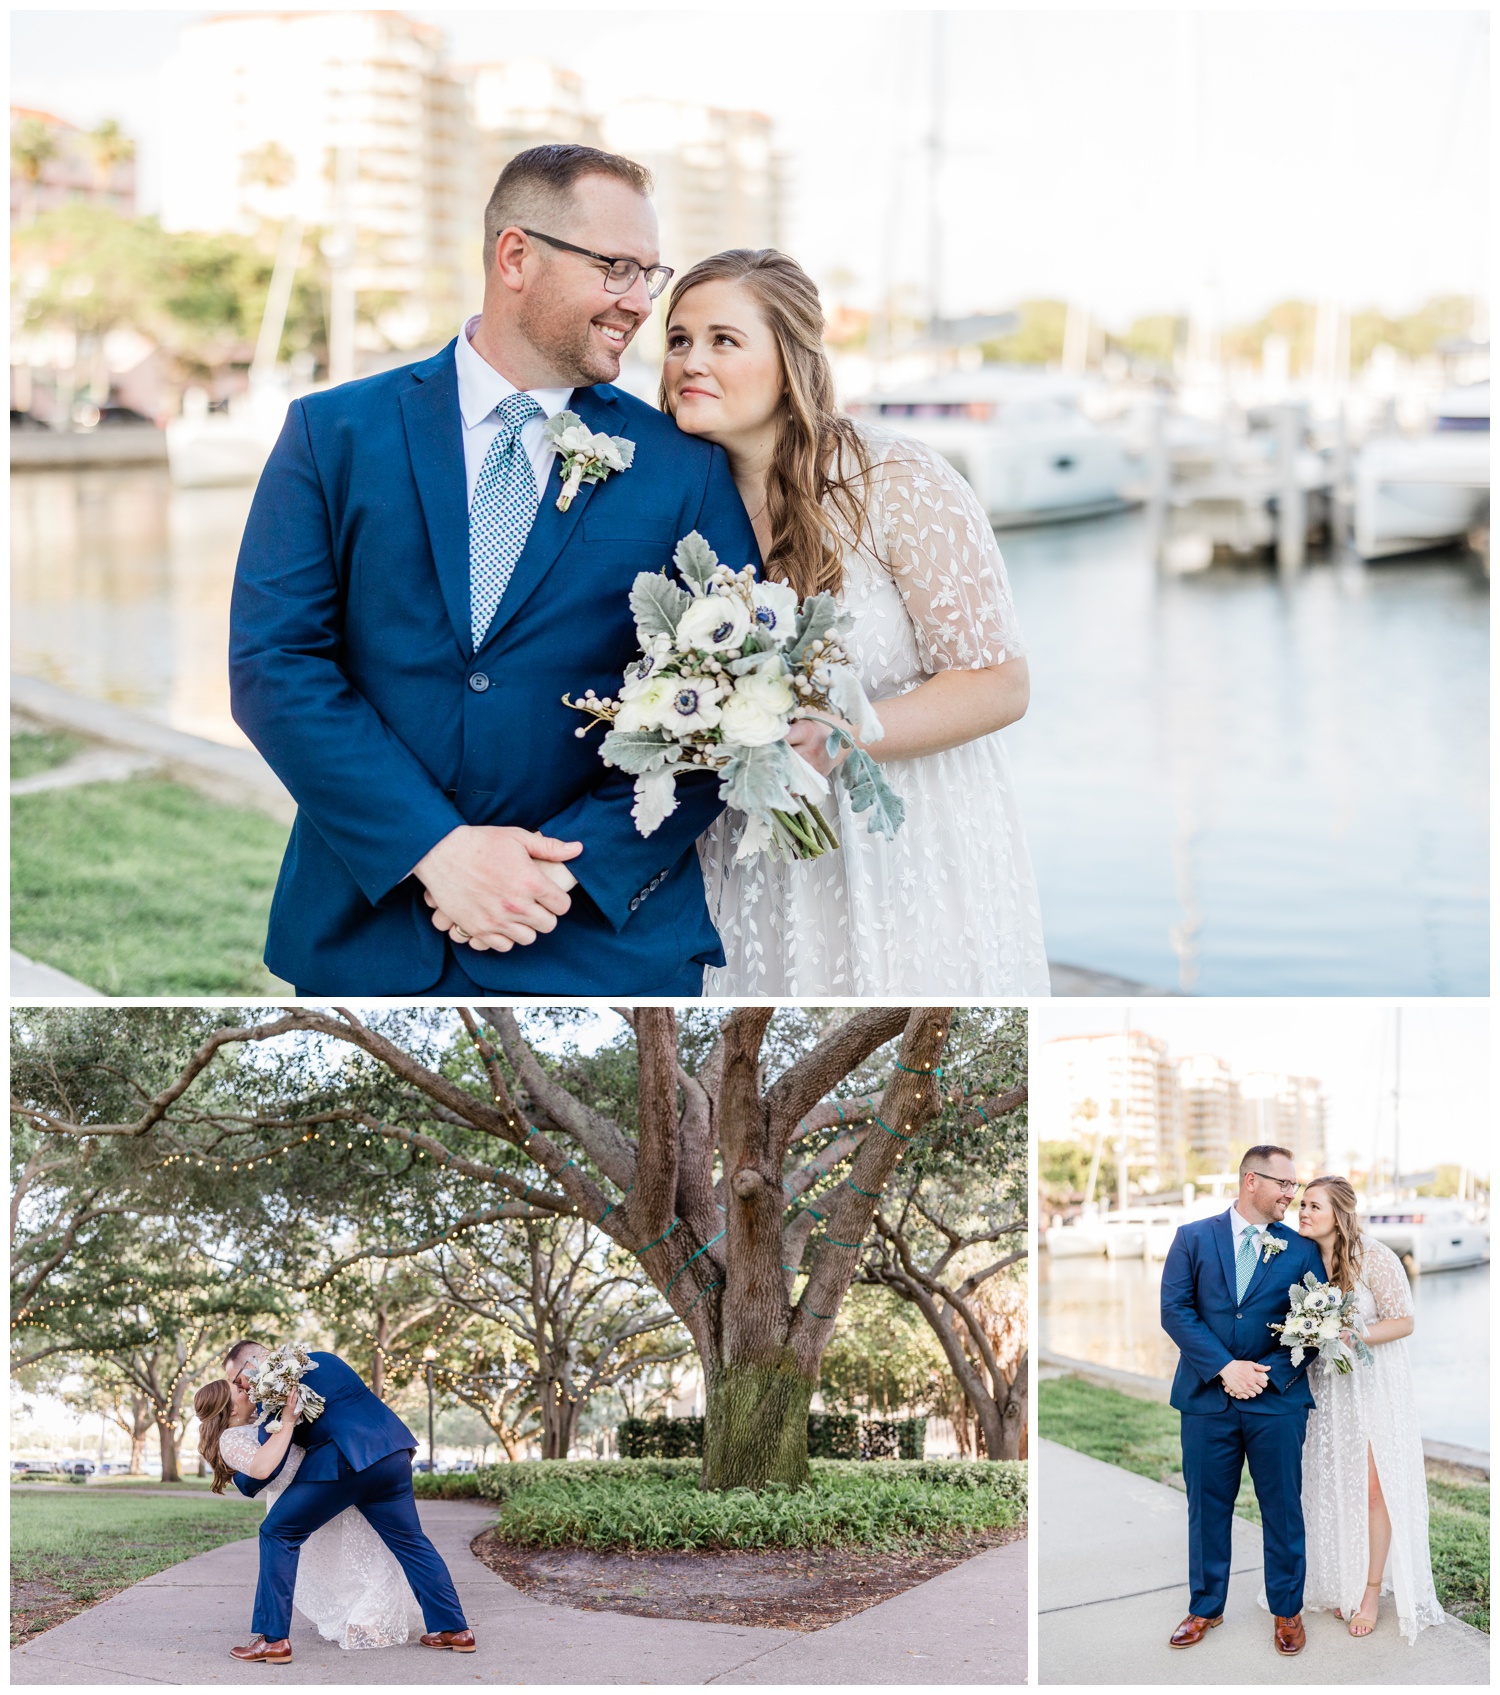 couples photos - The St. Pete Elopement Package - apt b photography